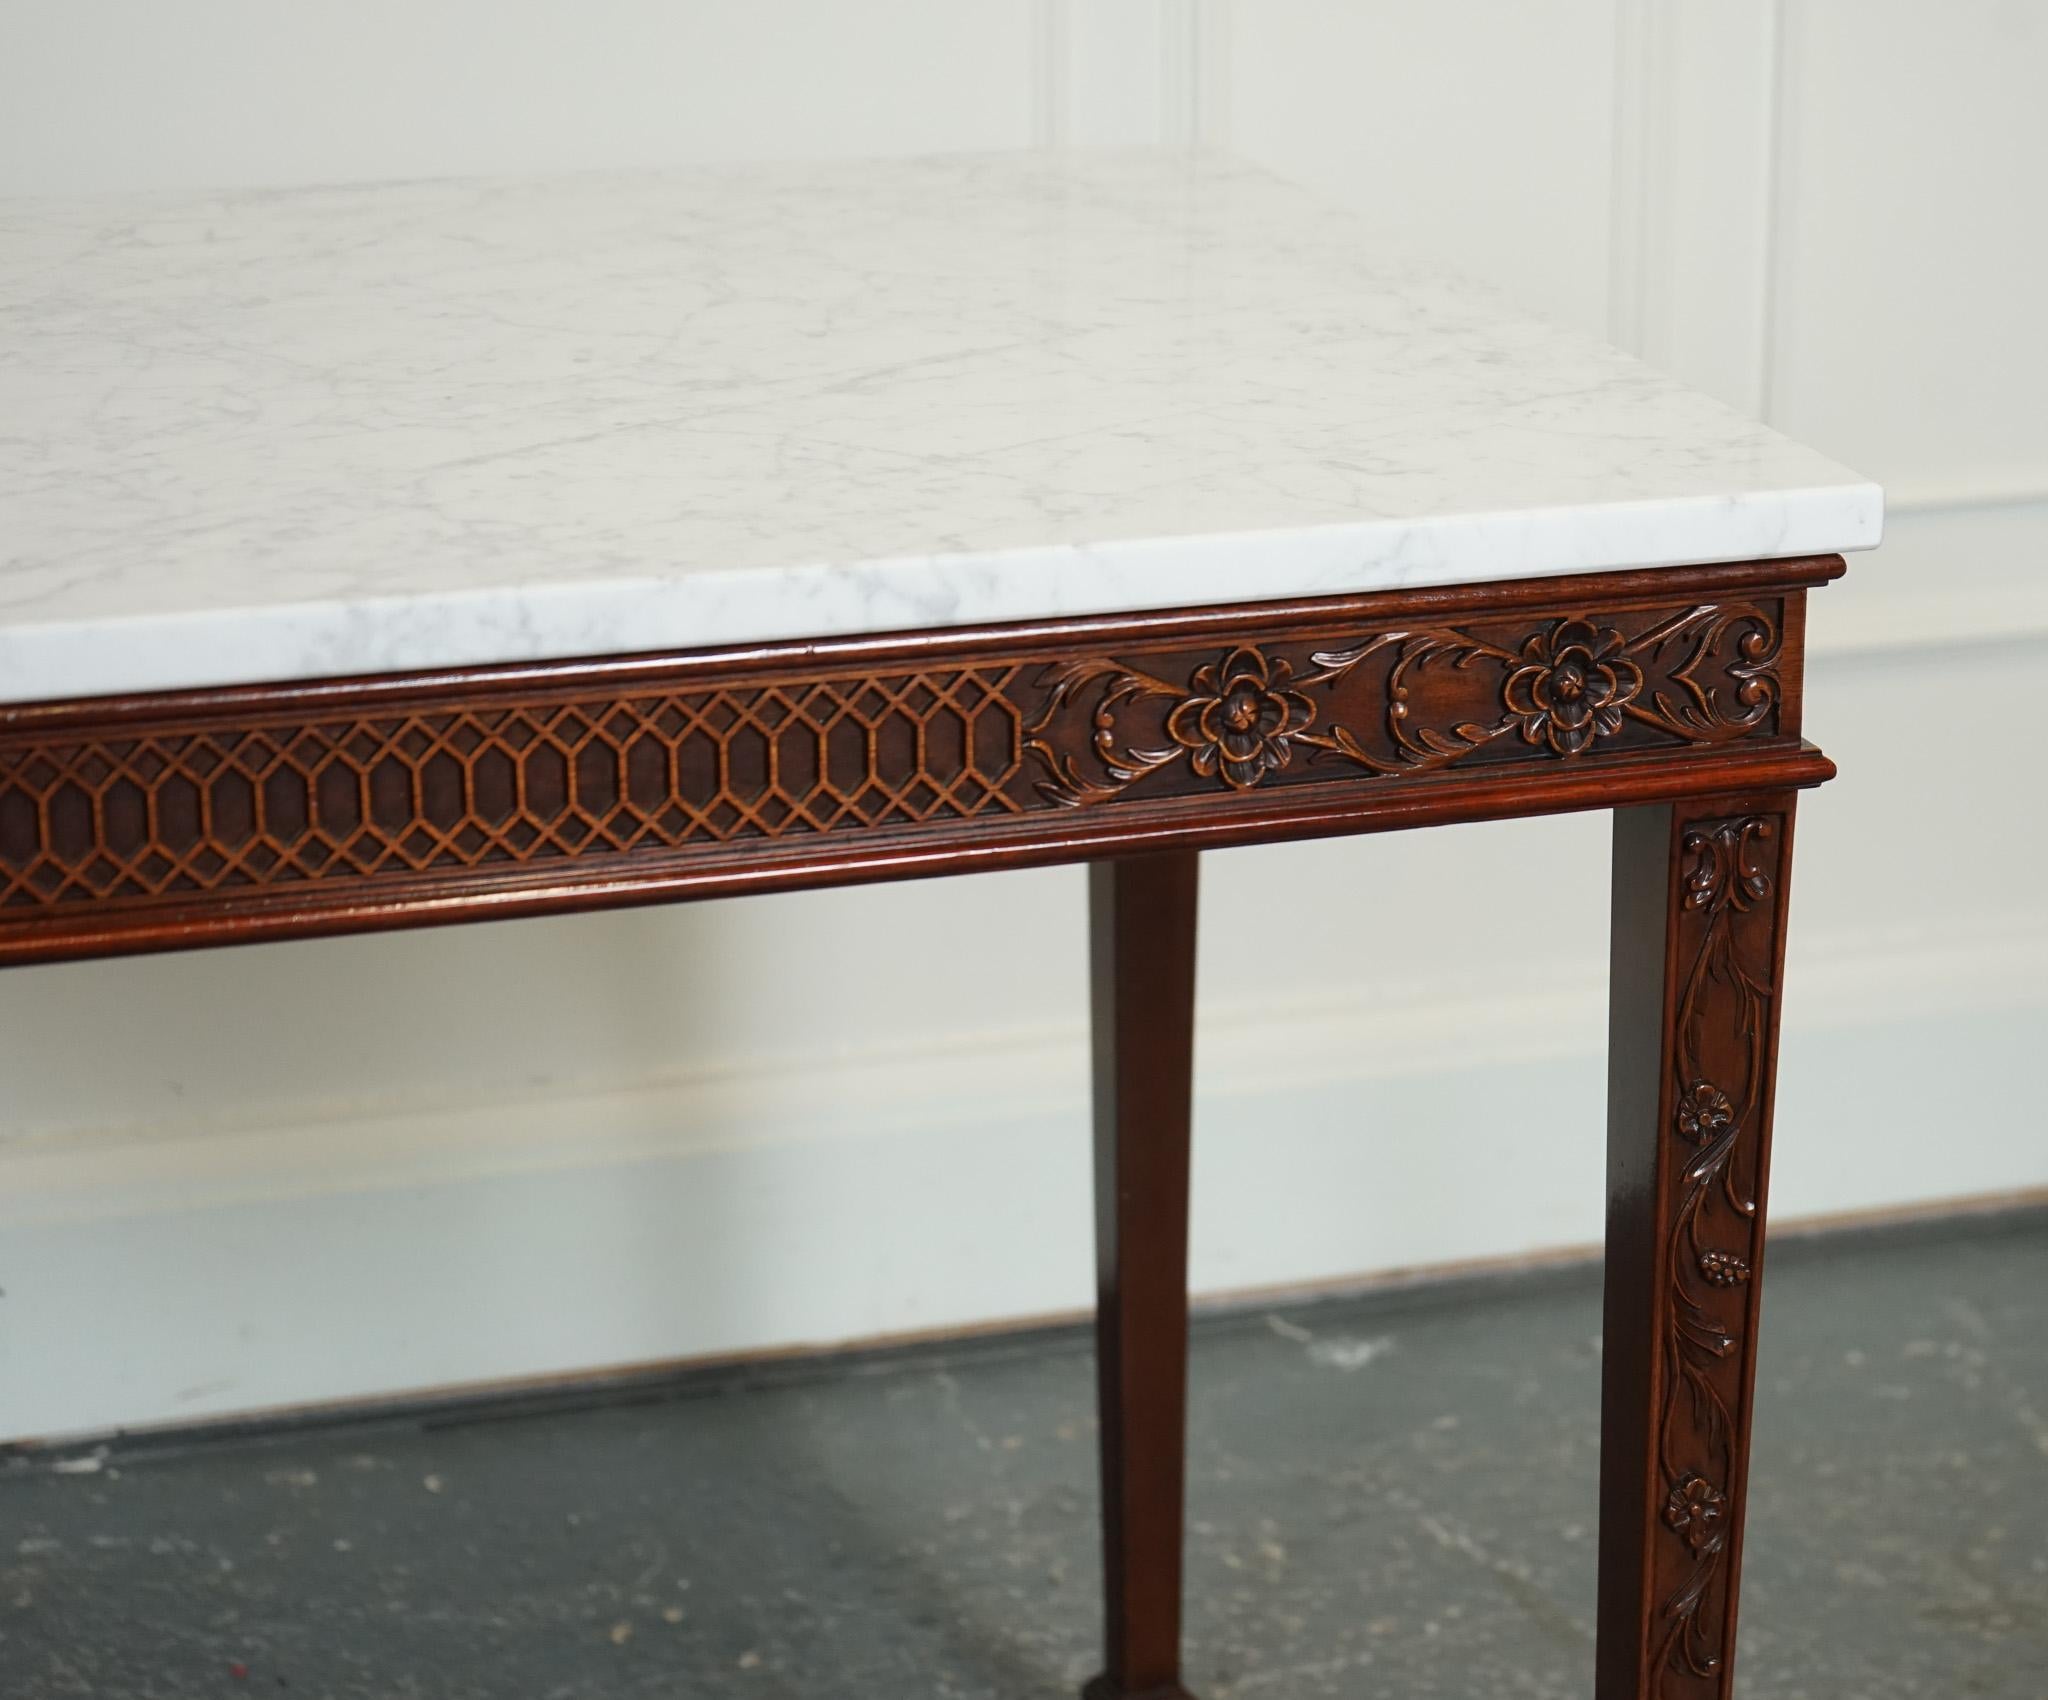 PAiR OF CHIPPENDALE  Style CONSOLE TabLES MIT NEW WHITE CARRARA MARBLE TOPS im Zustand „Gut“ im Angebot in Pulborough, GB